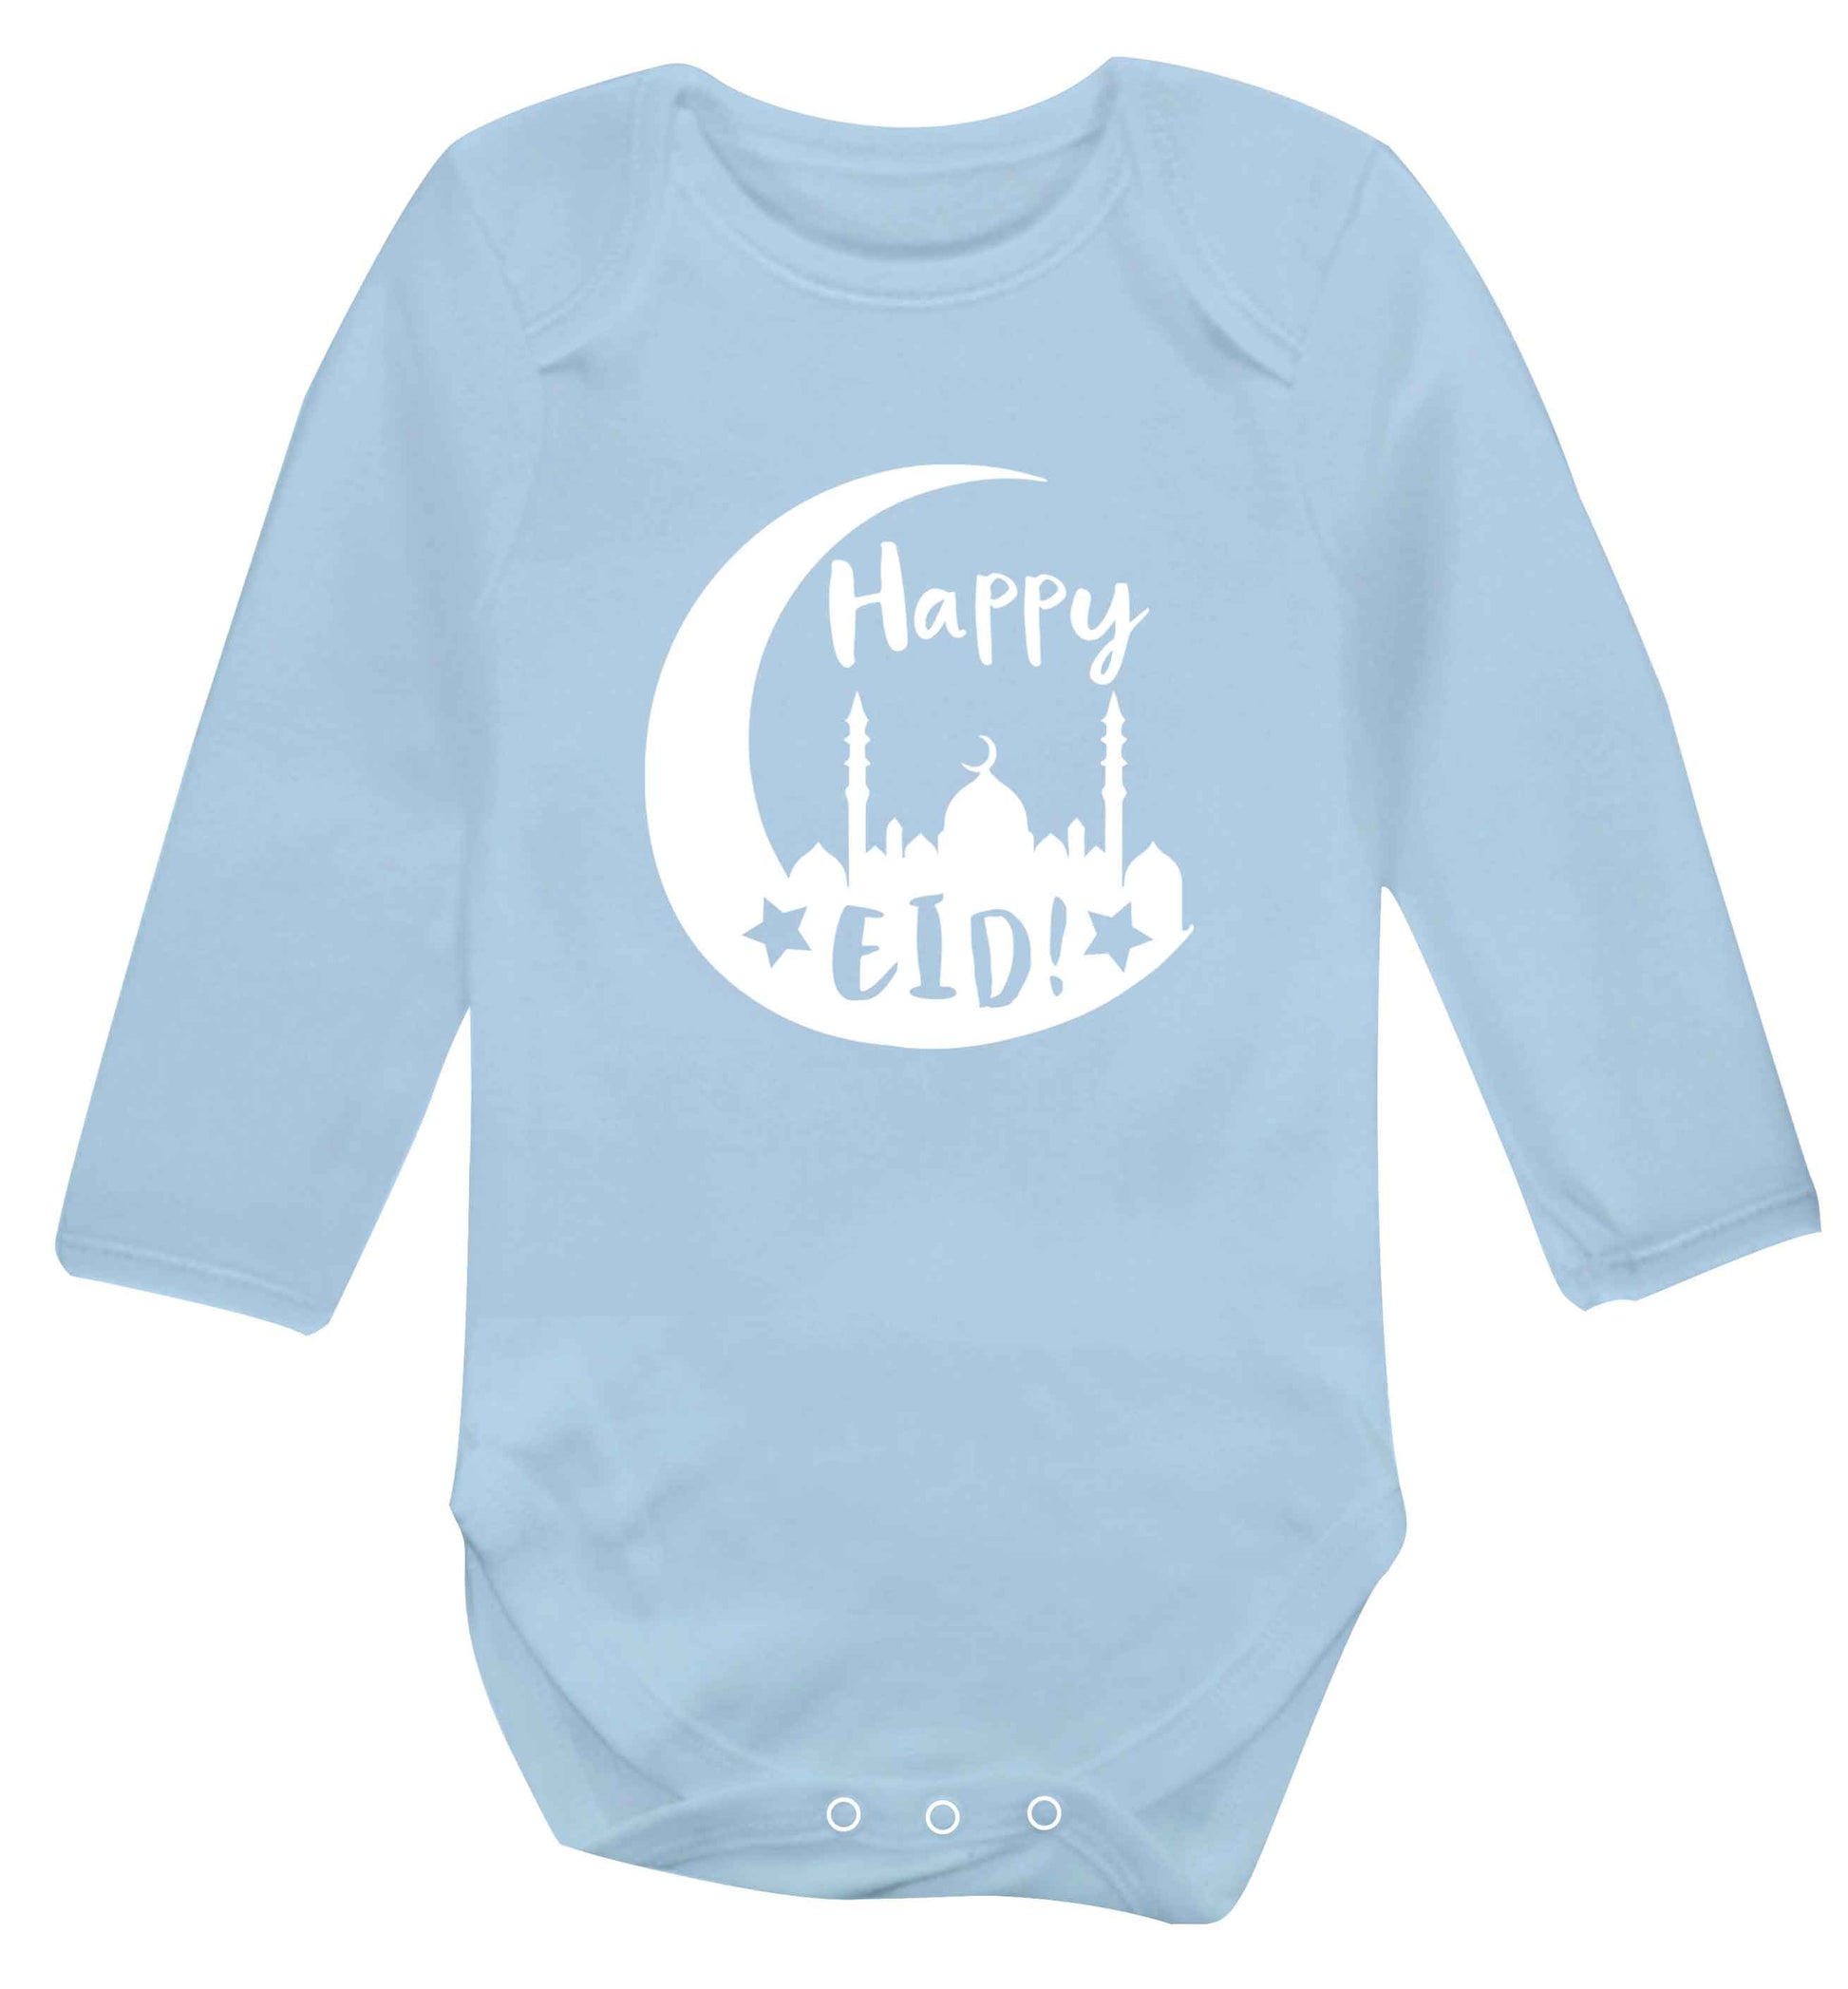 Happy Eid baby vest long sleeved pale blue 6-12 months